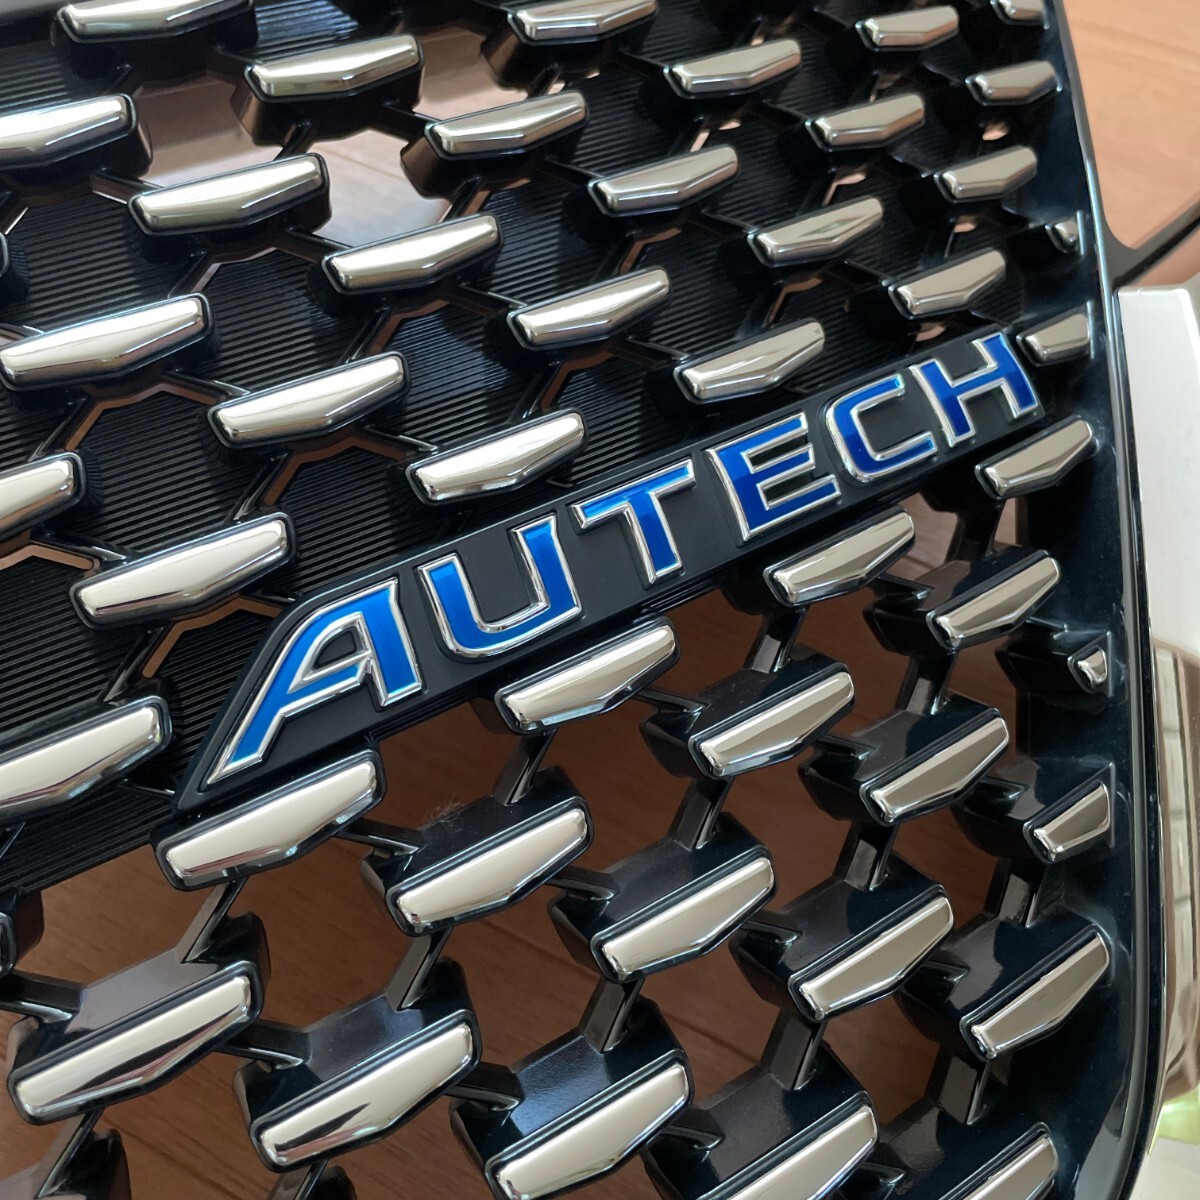  Nissan original Serena C27 previous term AUTECH "Autech" original front grille 62310-8A28D radiator grill emblem attaching gome private person anonymity delivery correspondence 